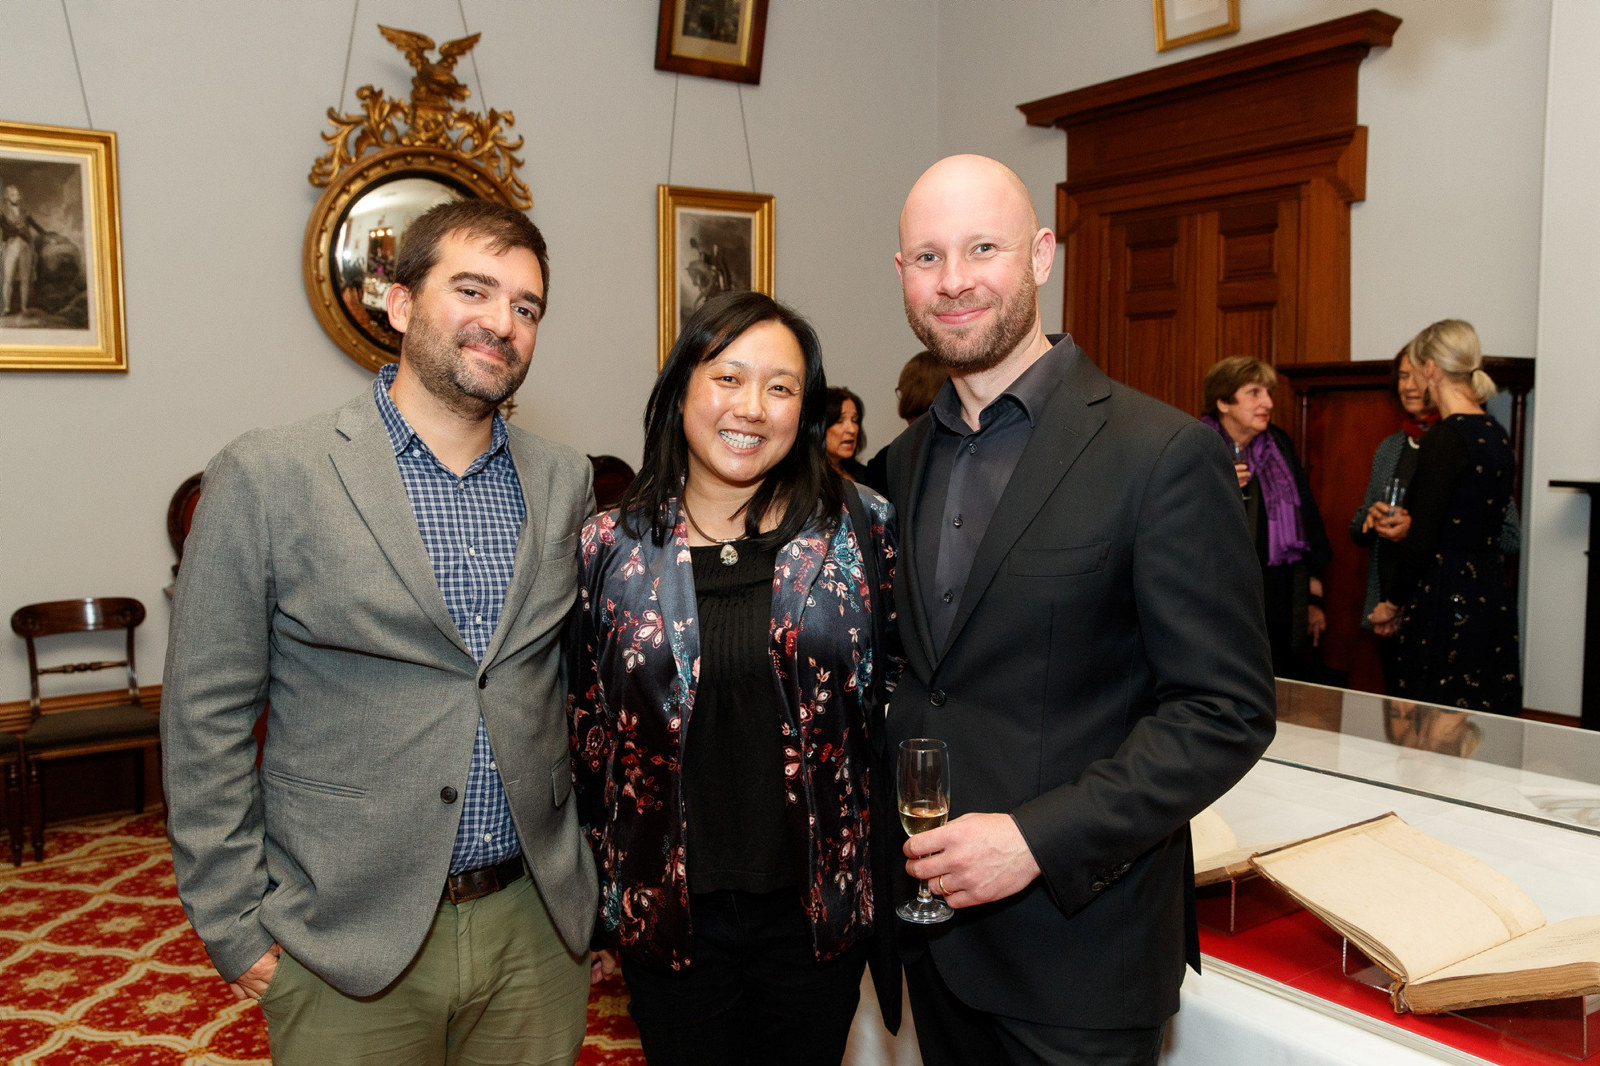 Benoit Dency, Grace Chan and Thomas Johnson at the Bel Canto in the Bush recital